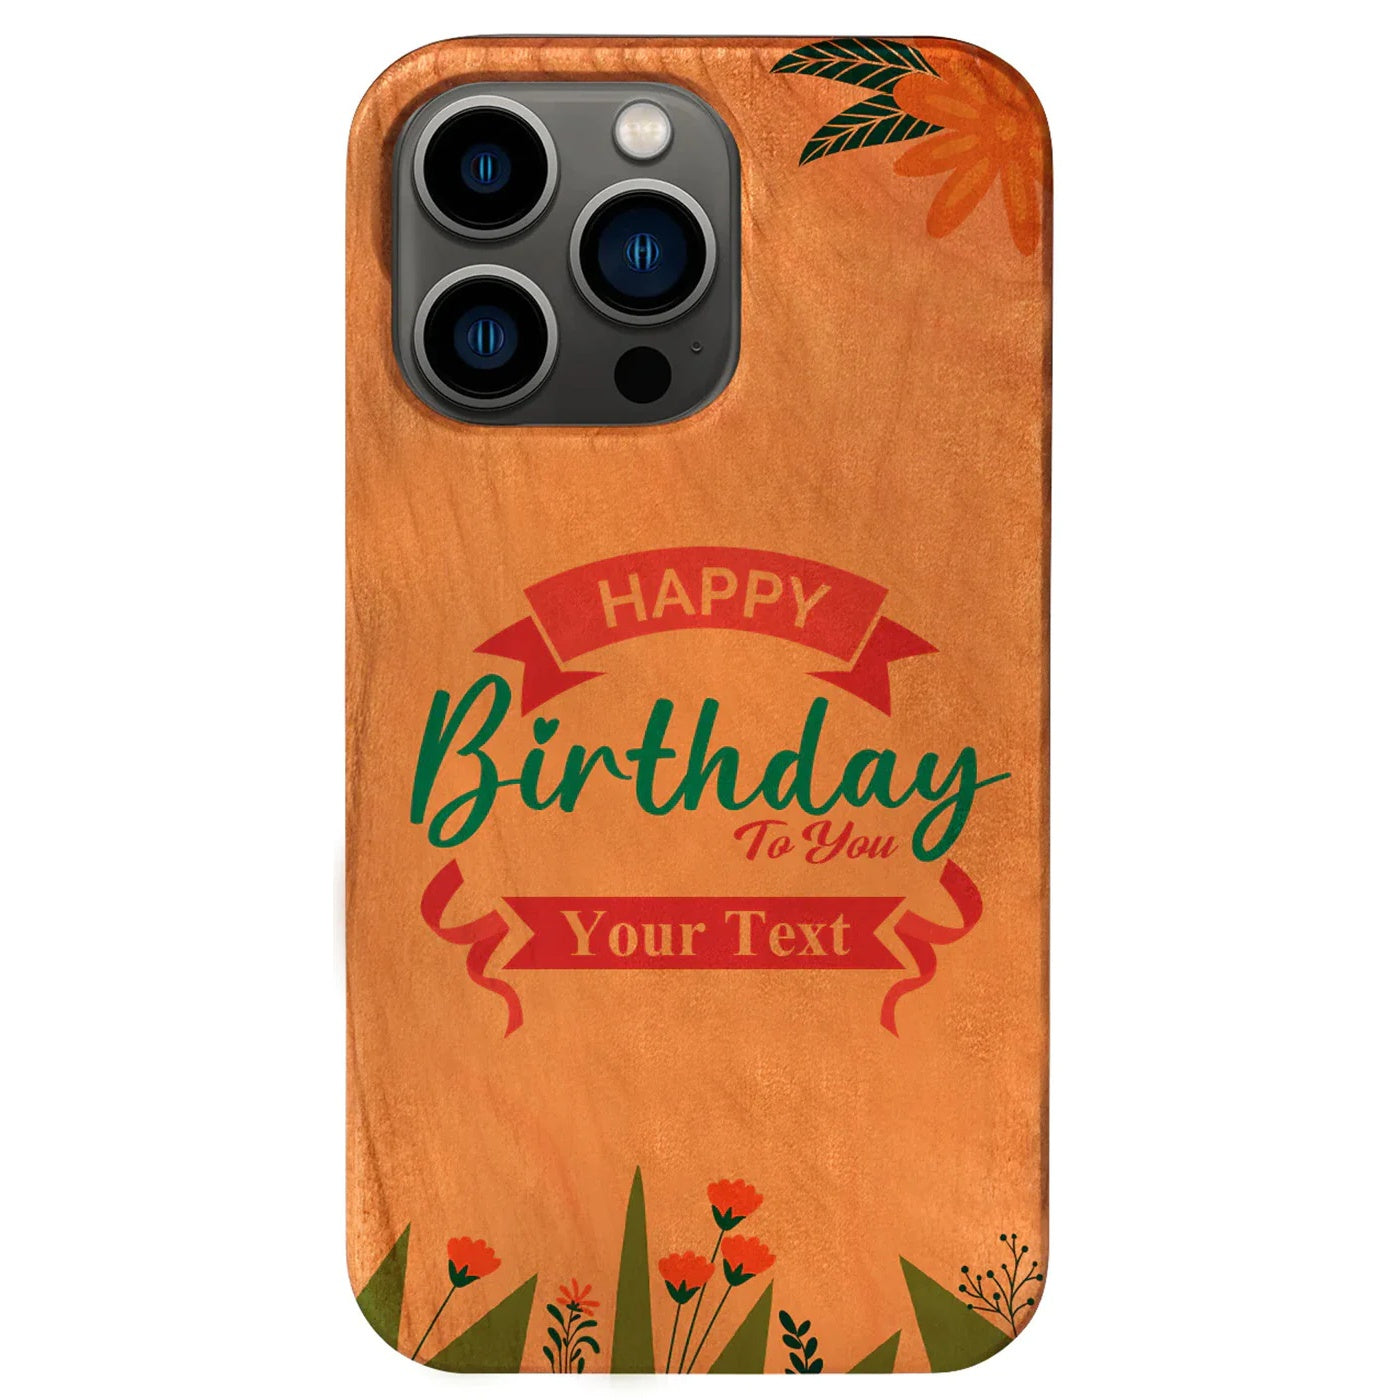 Happy Birthday To You - Customize Your Case